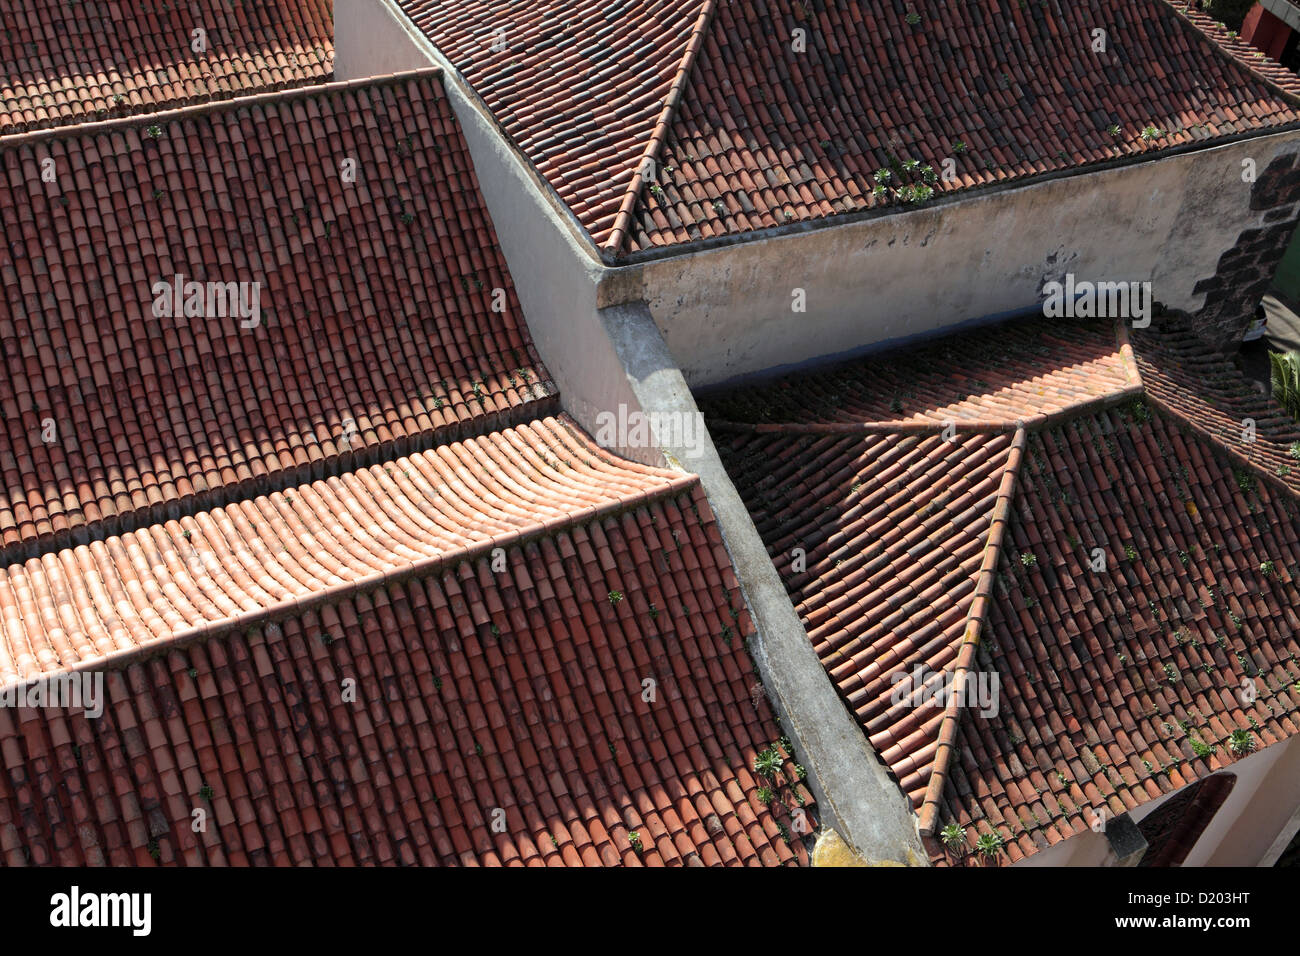 Overhead view of rooftops showing texture & color of old antique terracotta roof tiles, La Laguna, Tenerife. Stock Photo